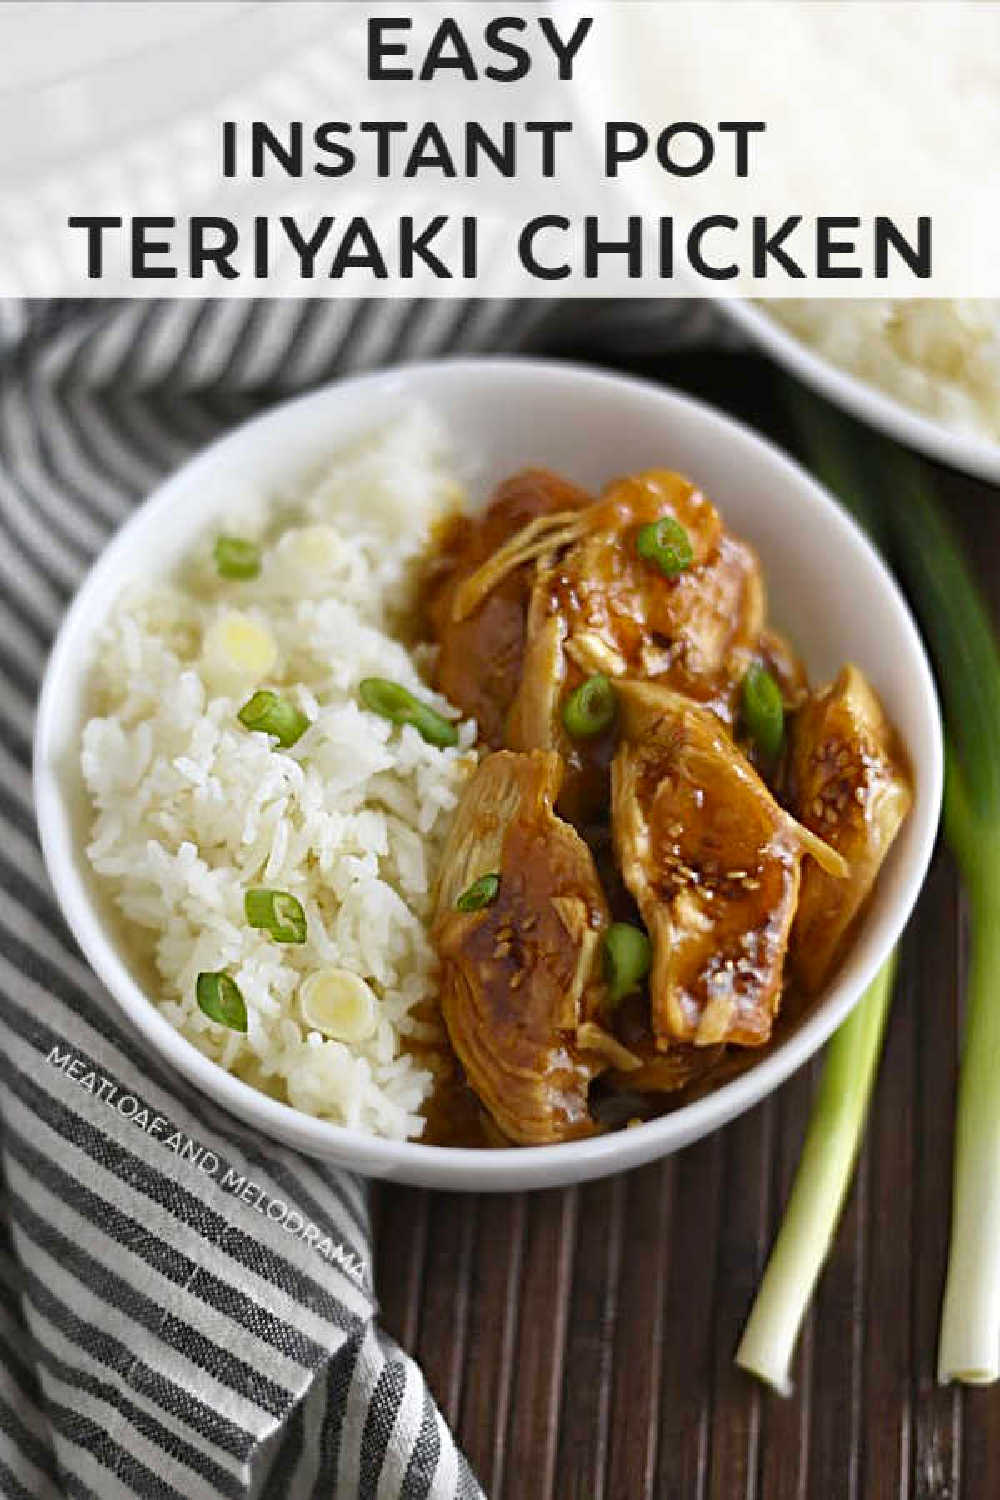 This simple Instant Pot Teriyaki Chicken recipe is easy, delicious and faster than take out! Just add everything to the pressure cooker, and dinner is ready in about 30 minutes! via @meamel